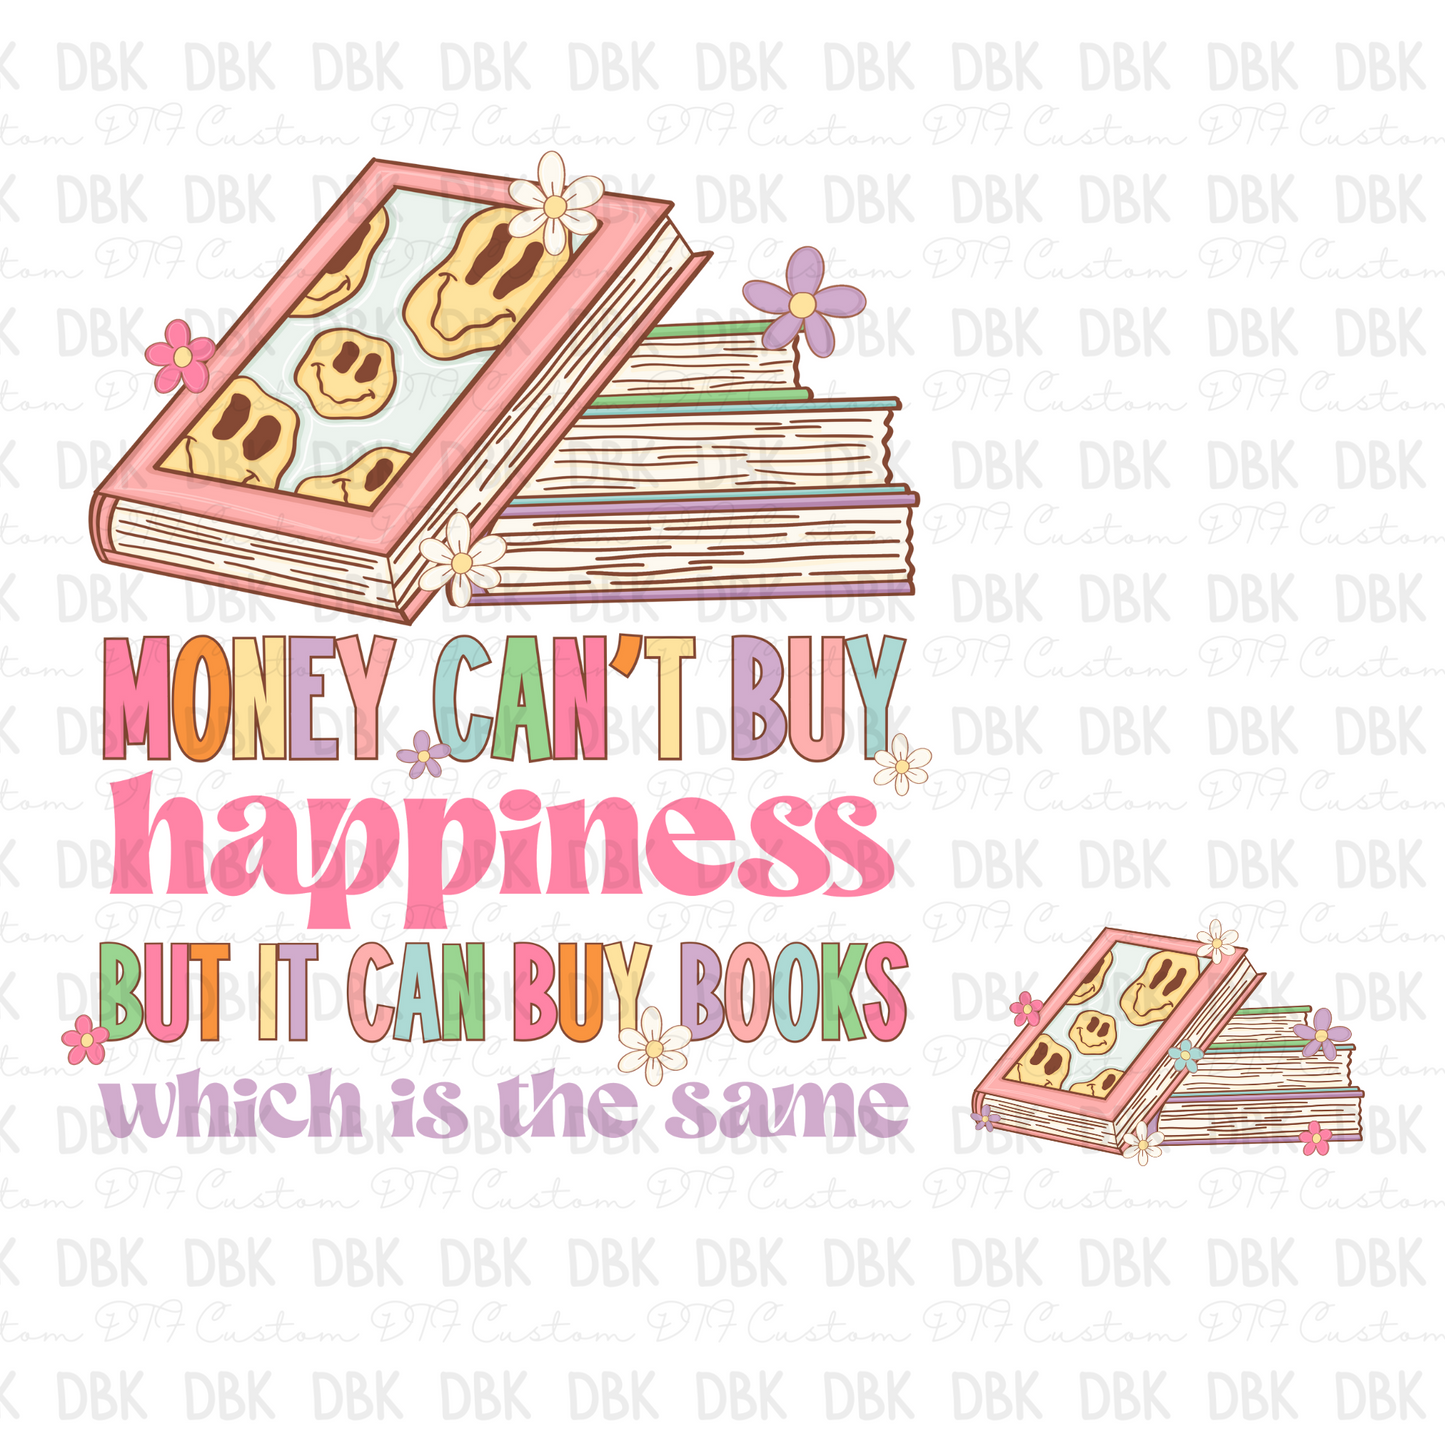 Money can't buy happiness, but it can buy books DTF transfer (Don't forget to purchase the pocket)